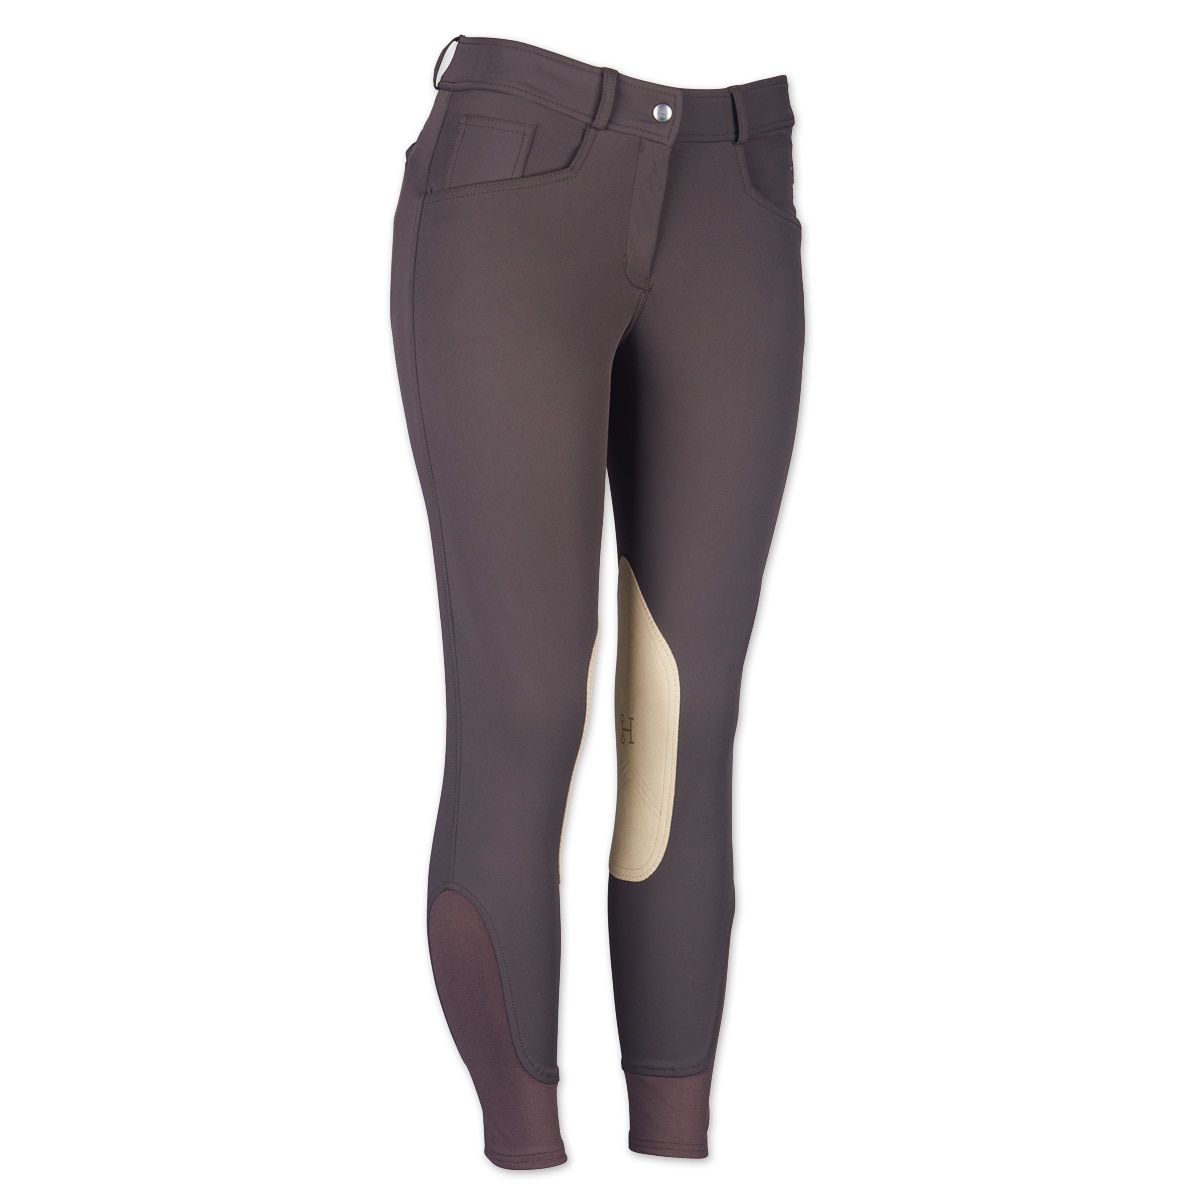 Hadley Knee Patch Breeches by SmartPak